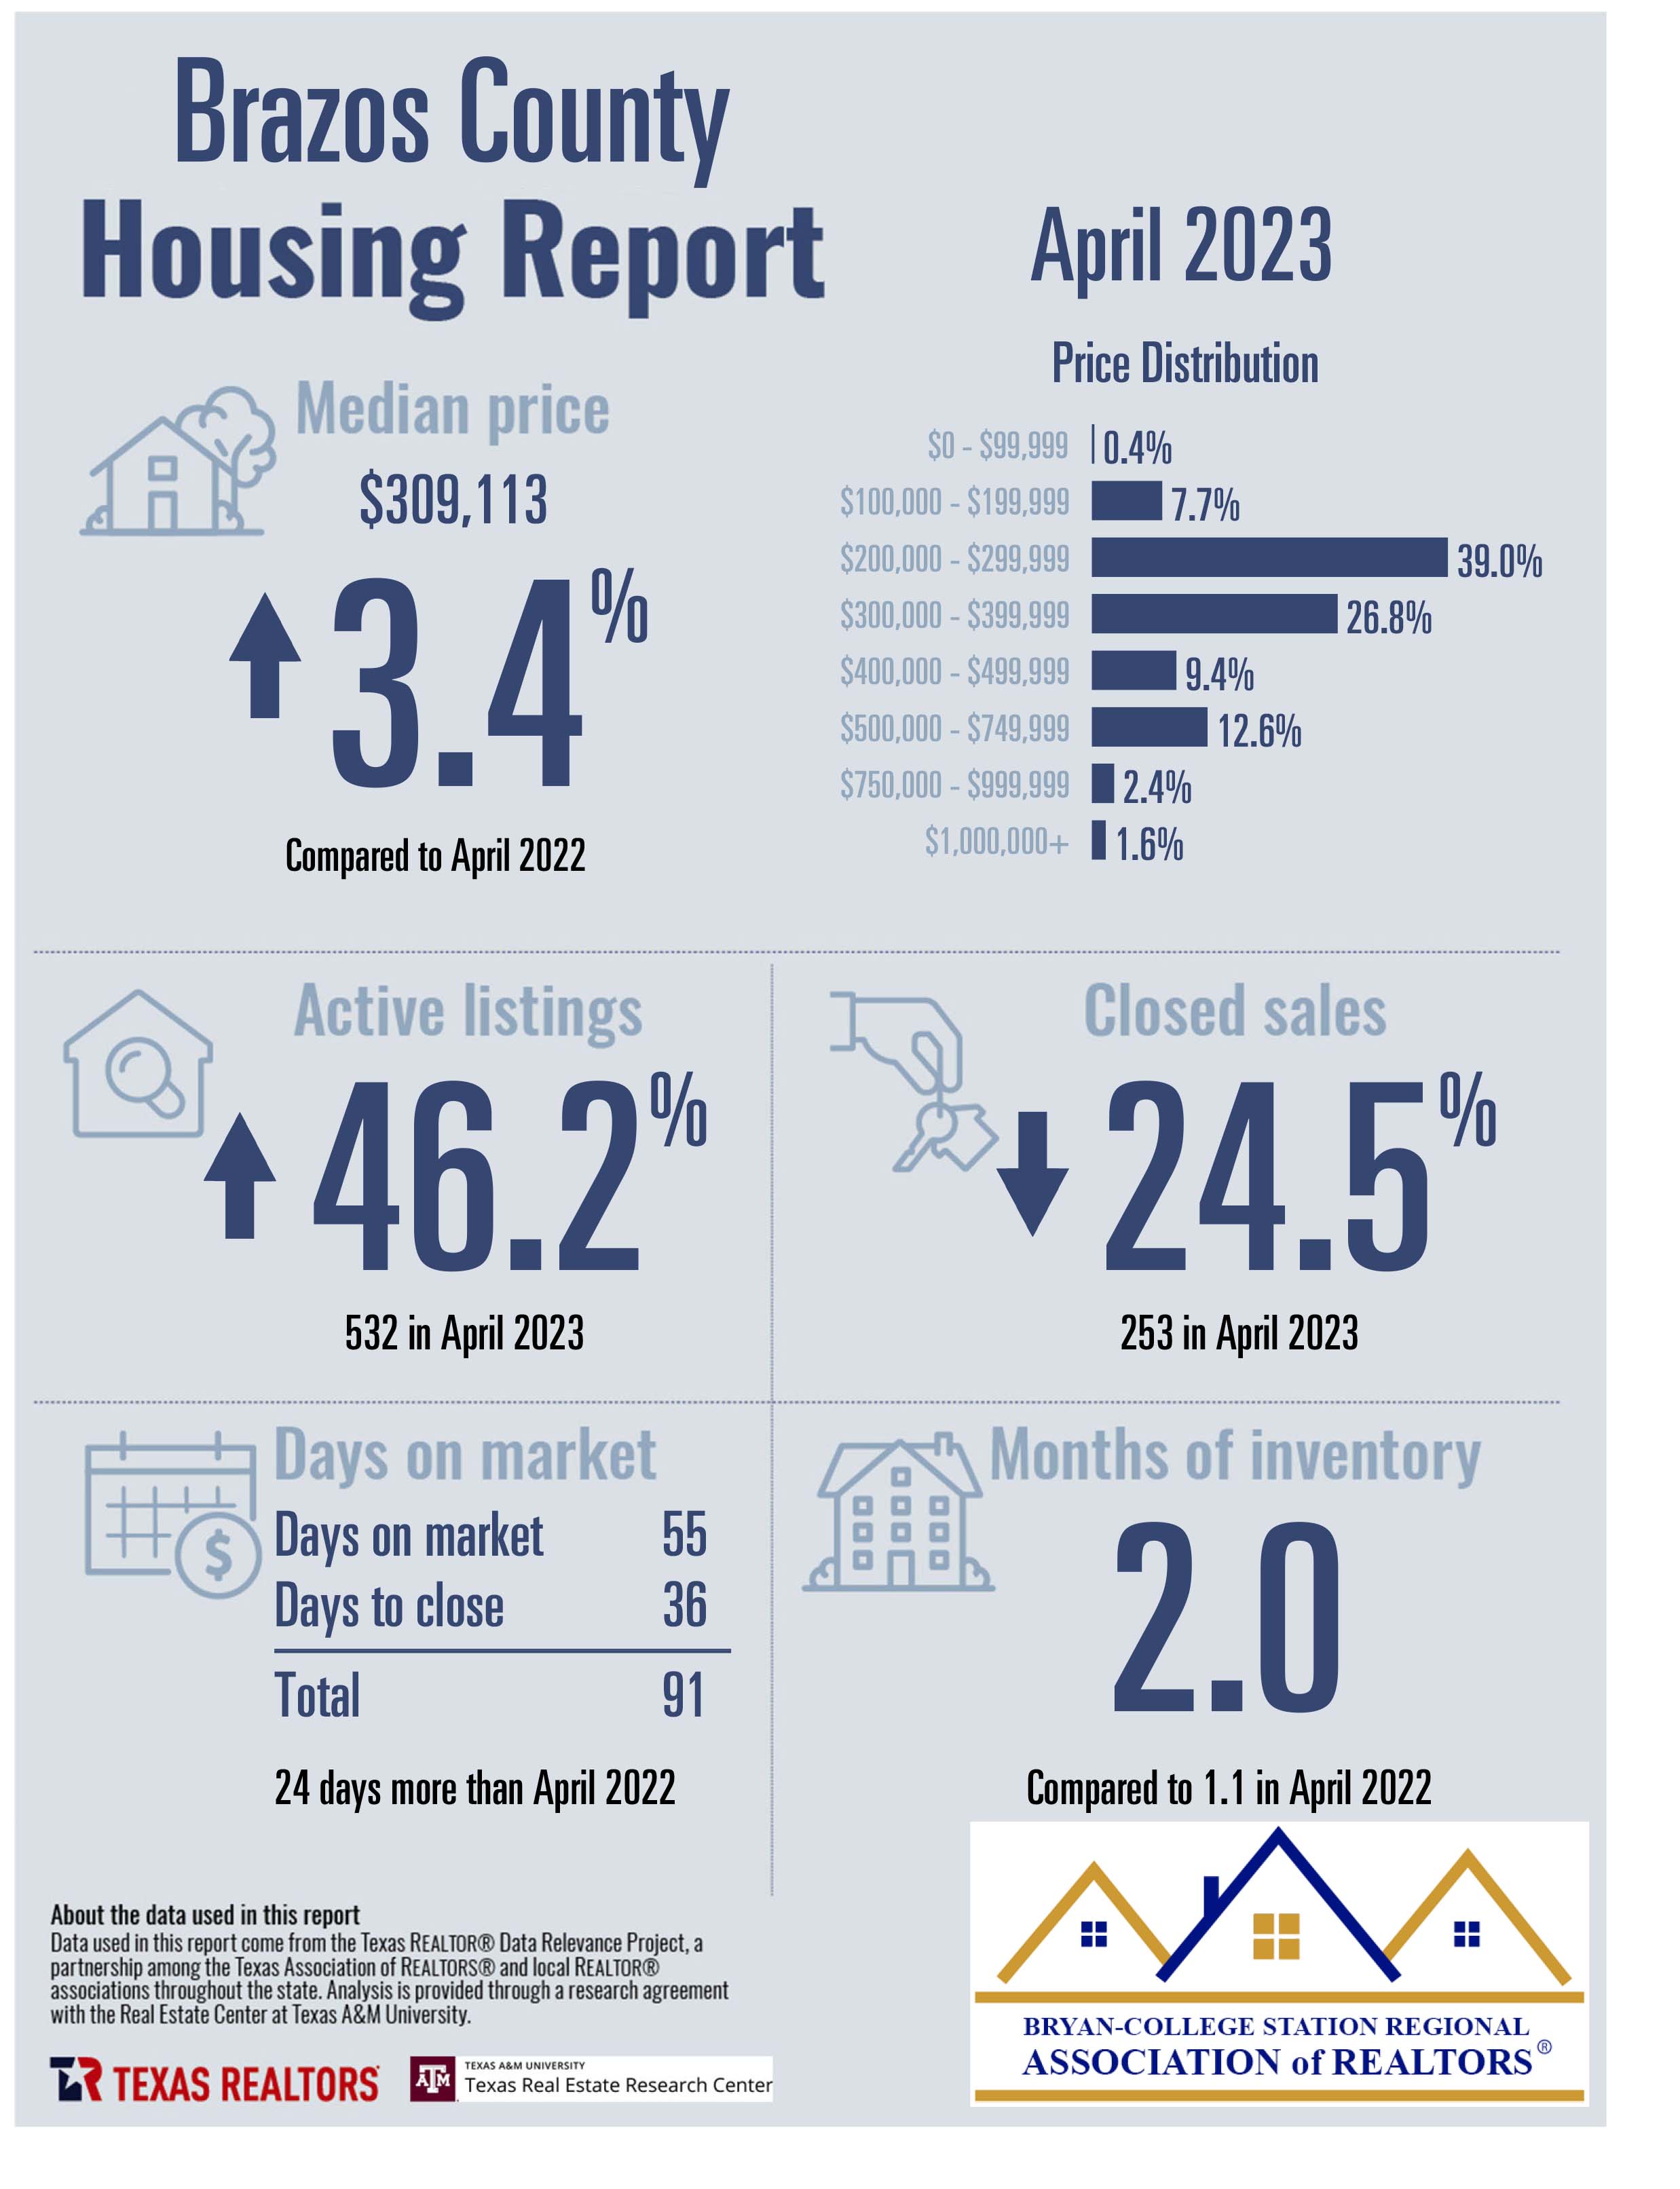 Residential Home Sale Report april 2023 - Brazos